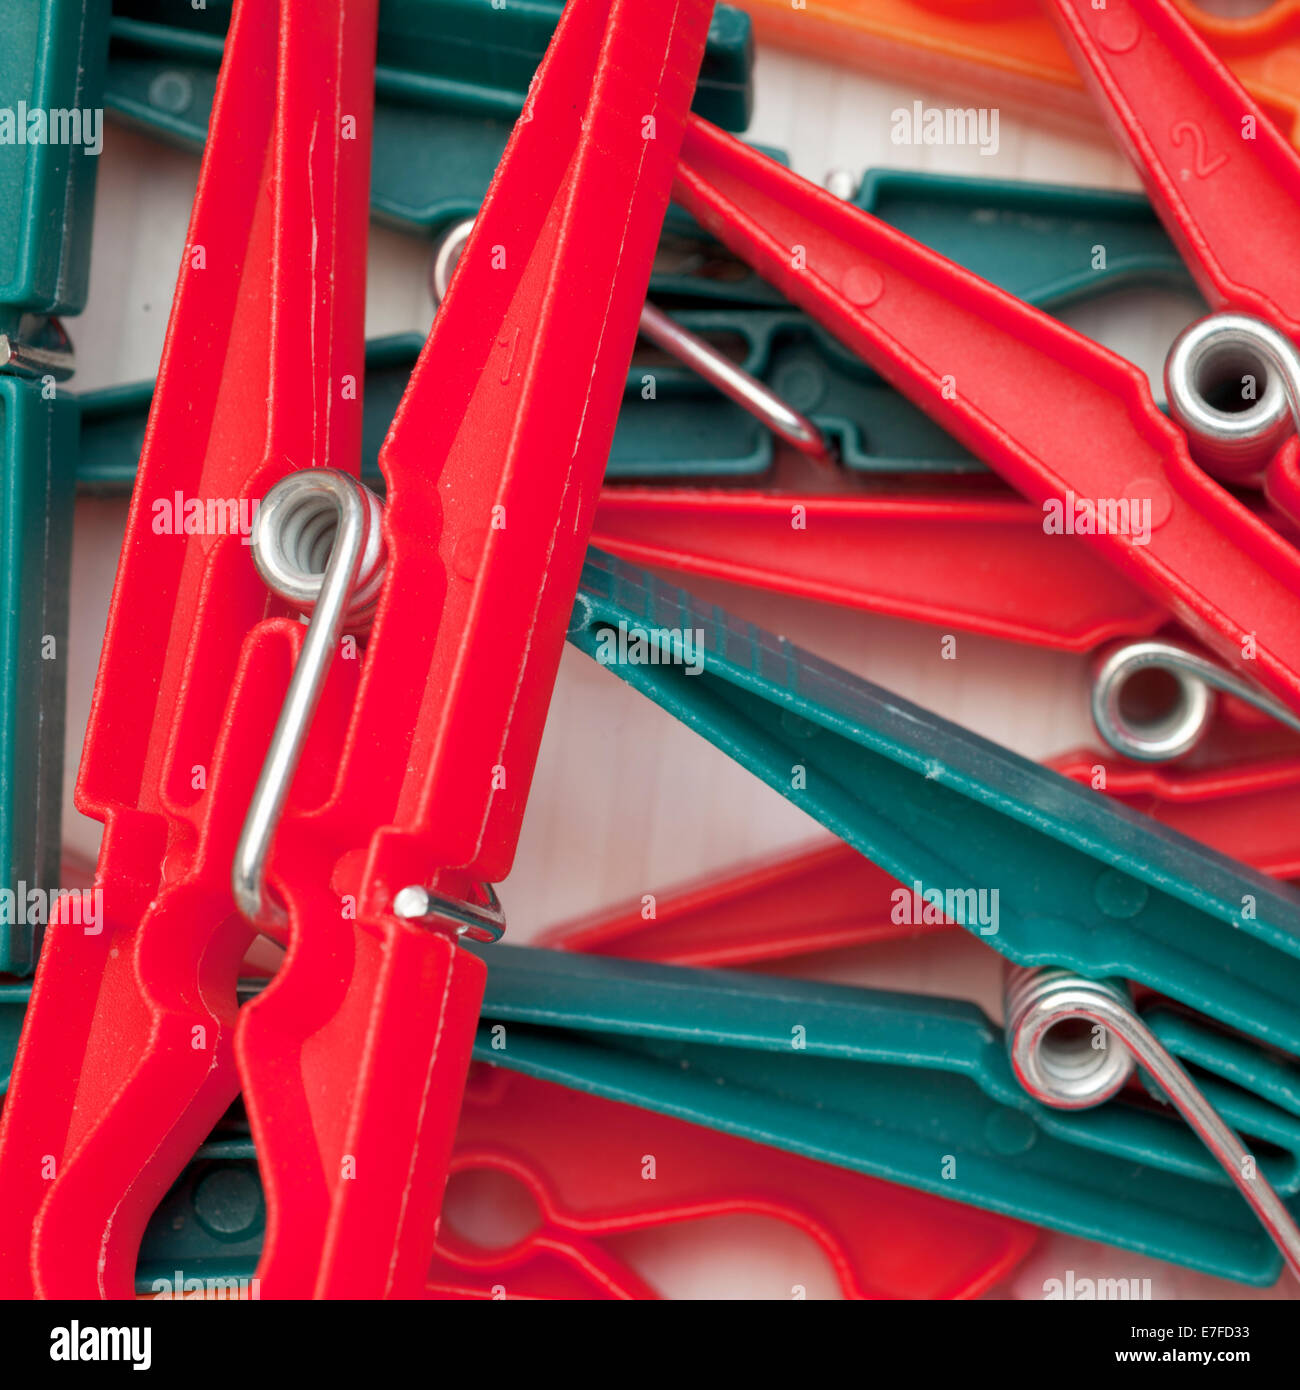 Close up of green and red clothes pegs Stock Photo